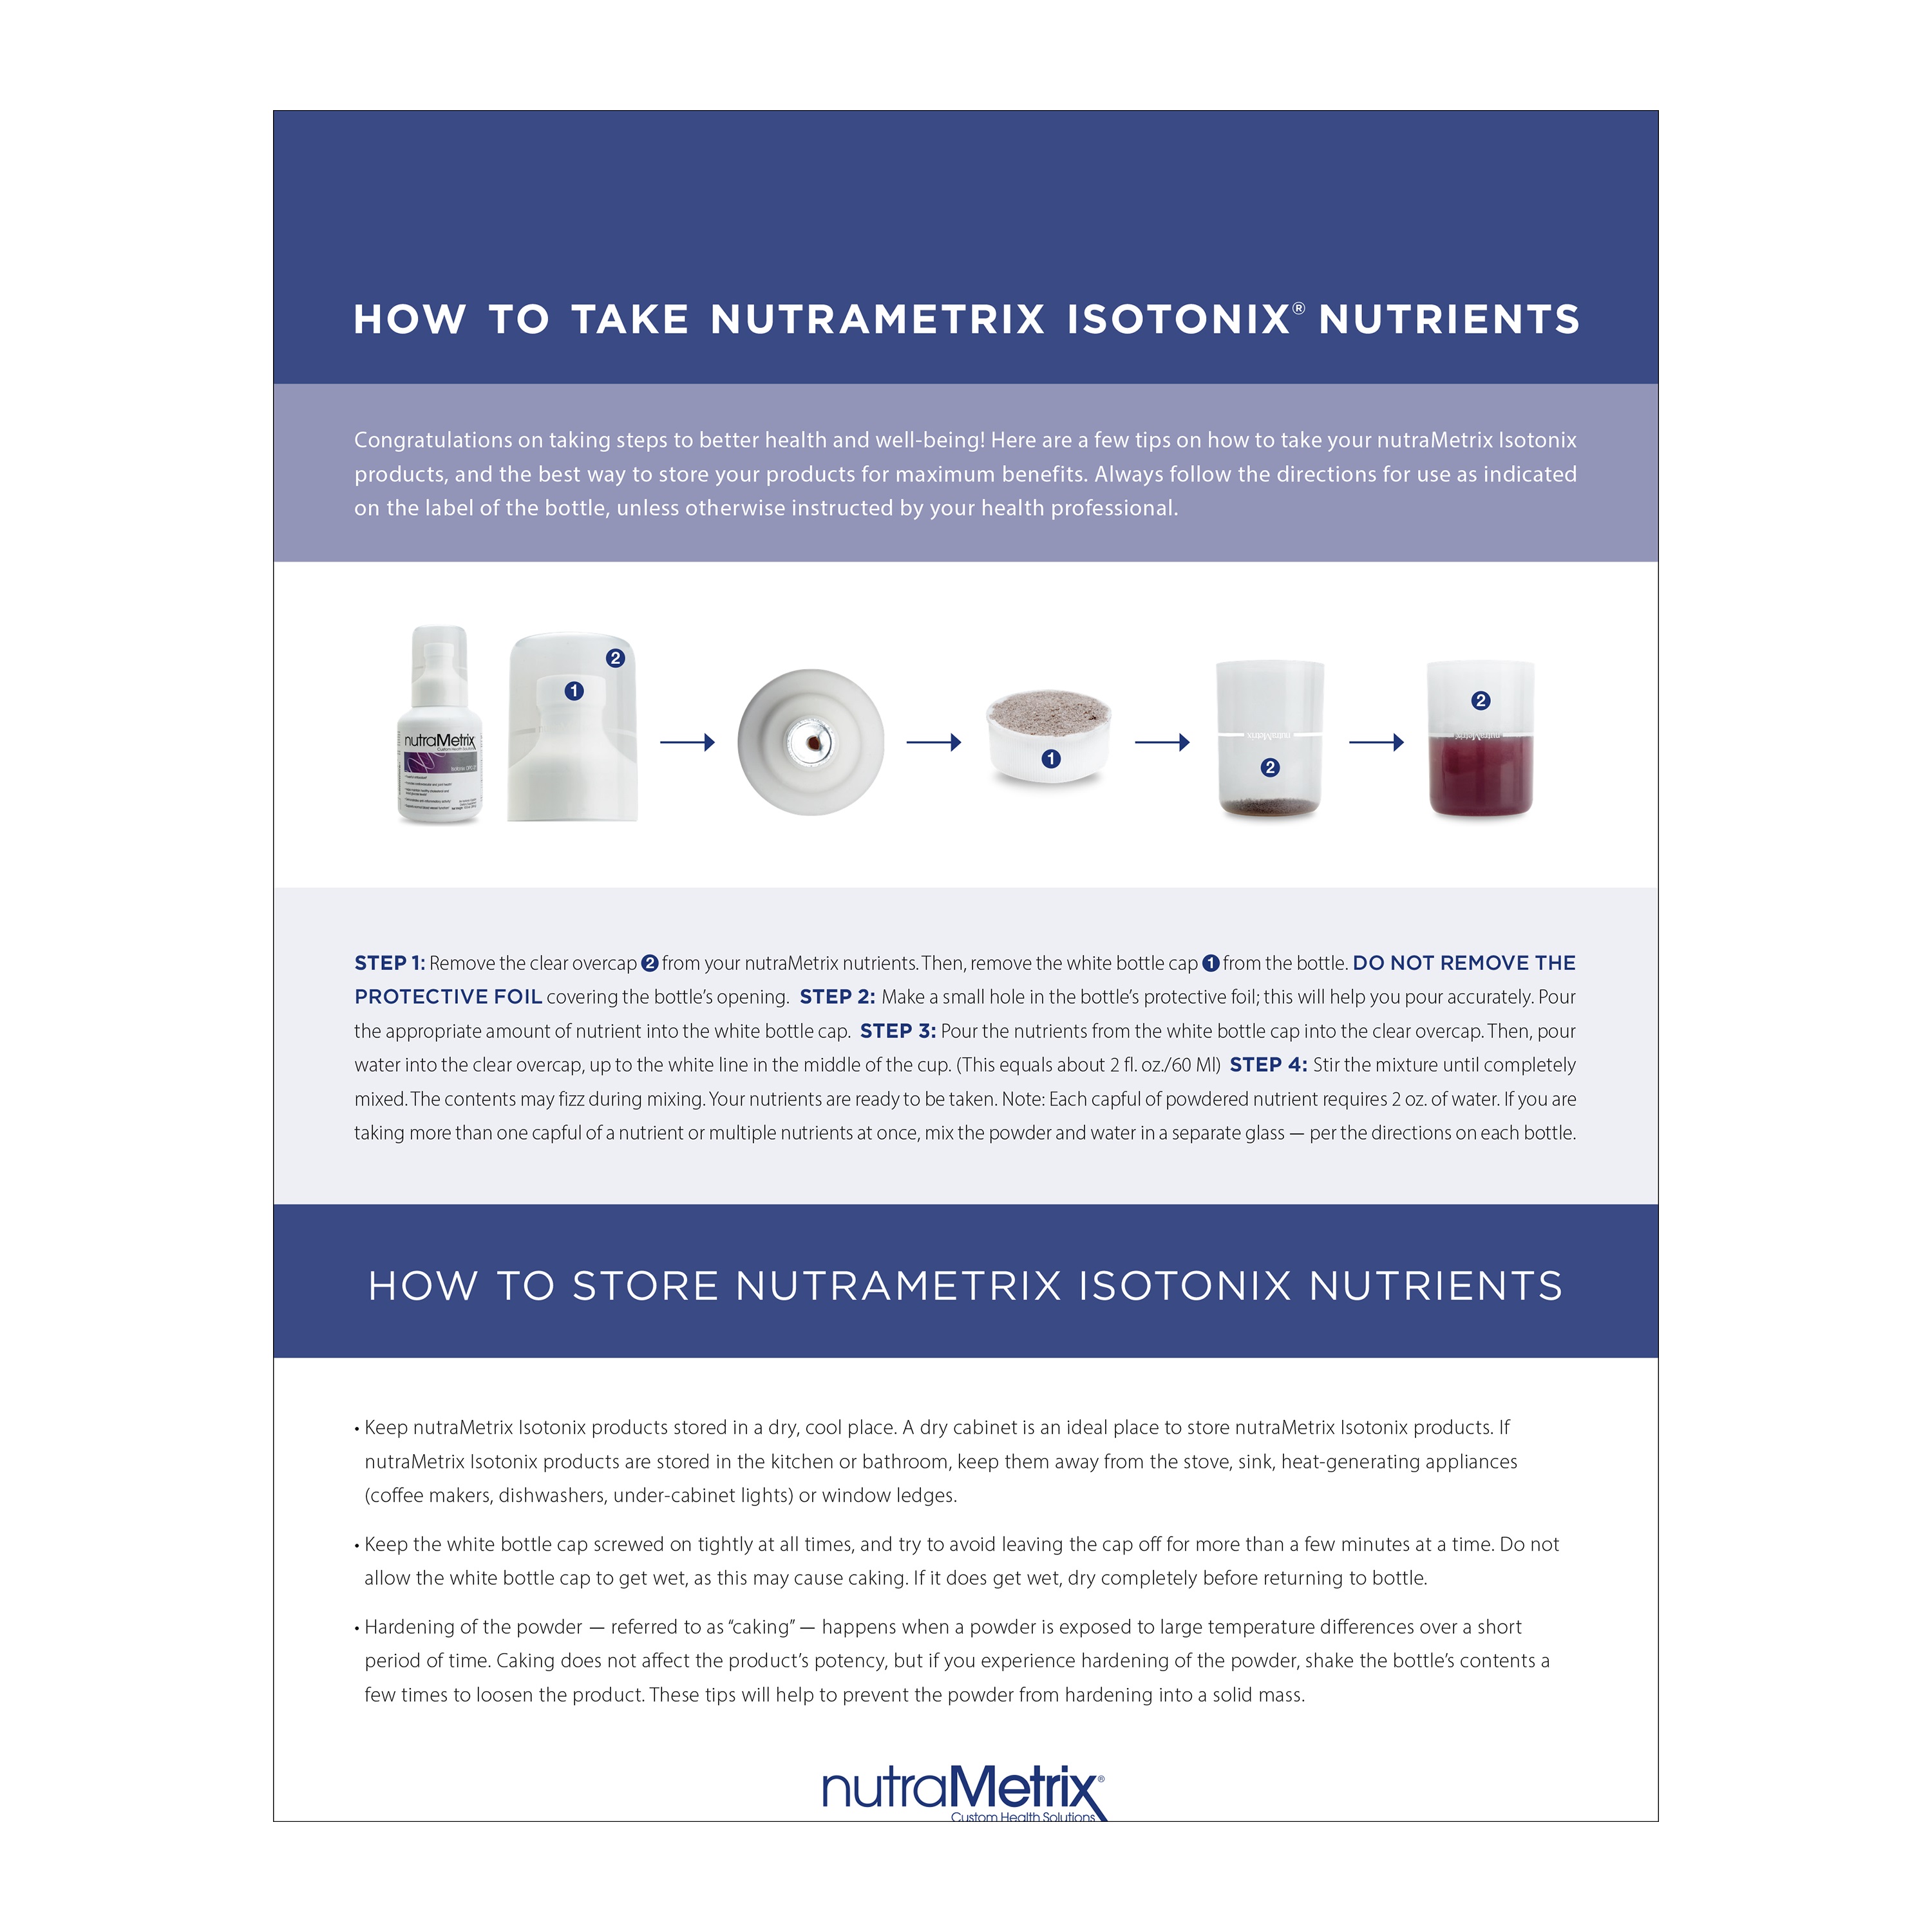 How To Take and Store nutraMetrix® Products